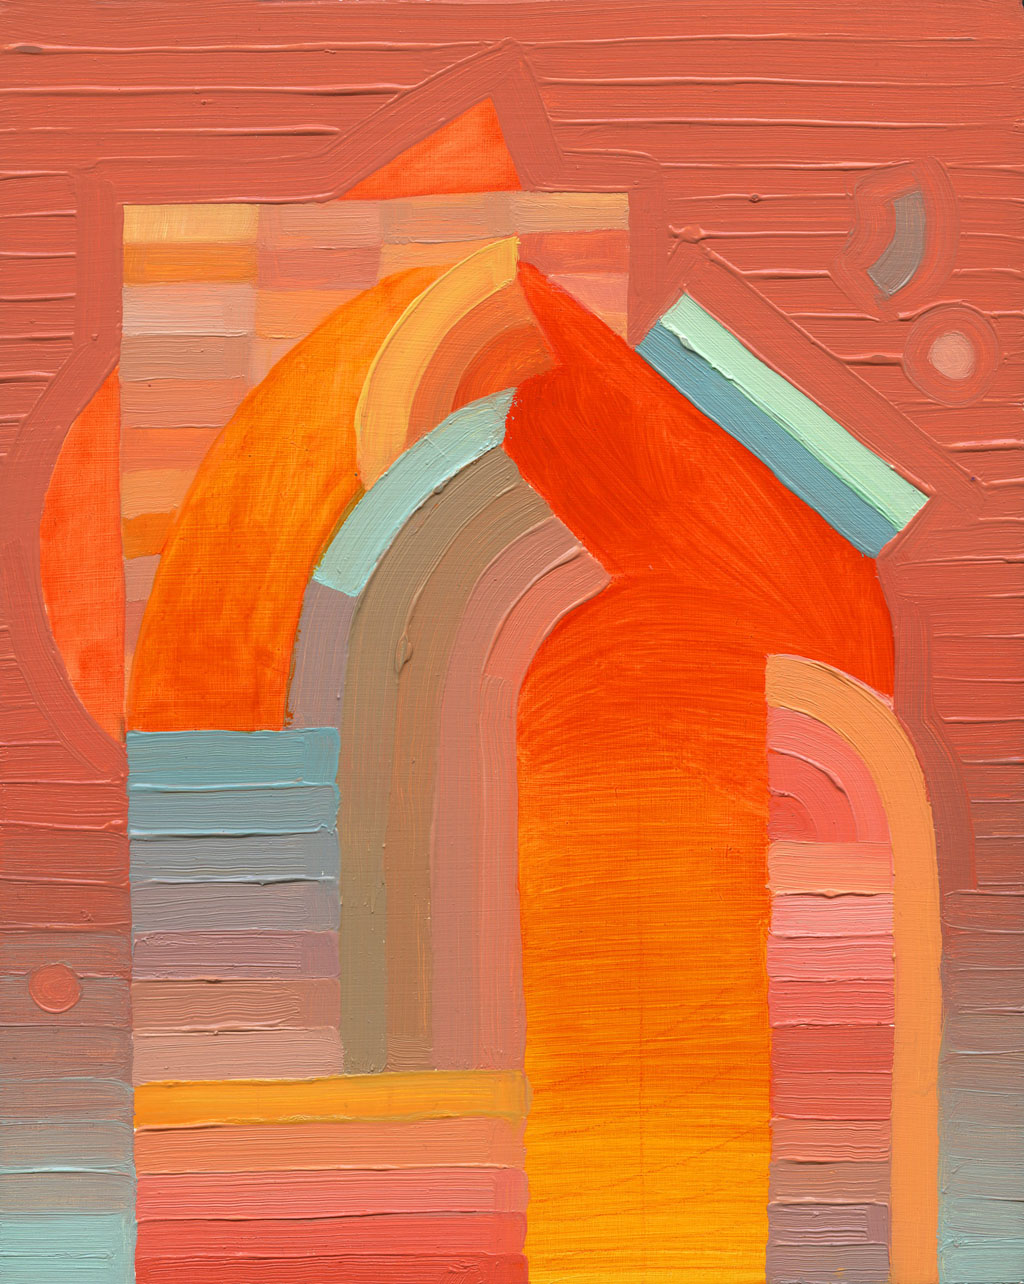 sunset-like art using linear and arched shapes